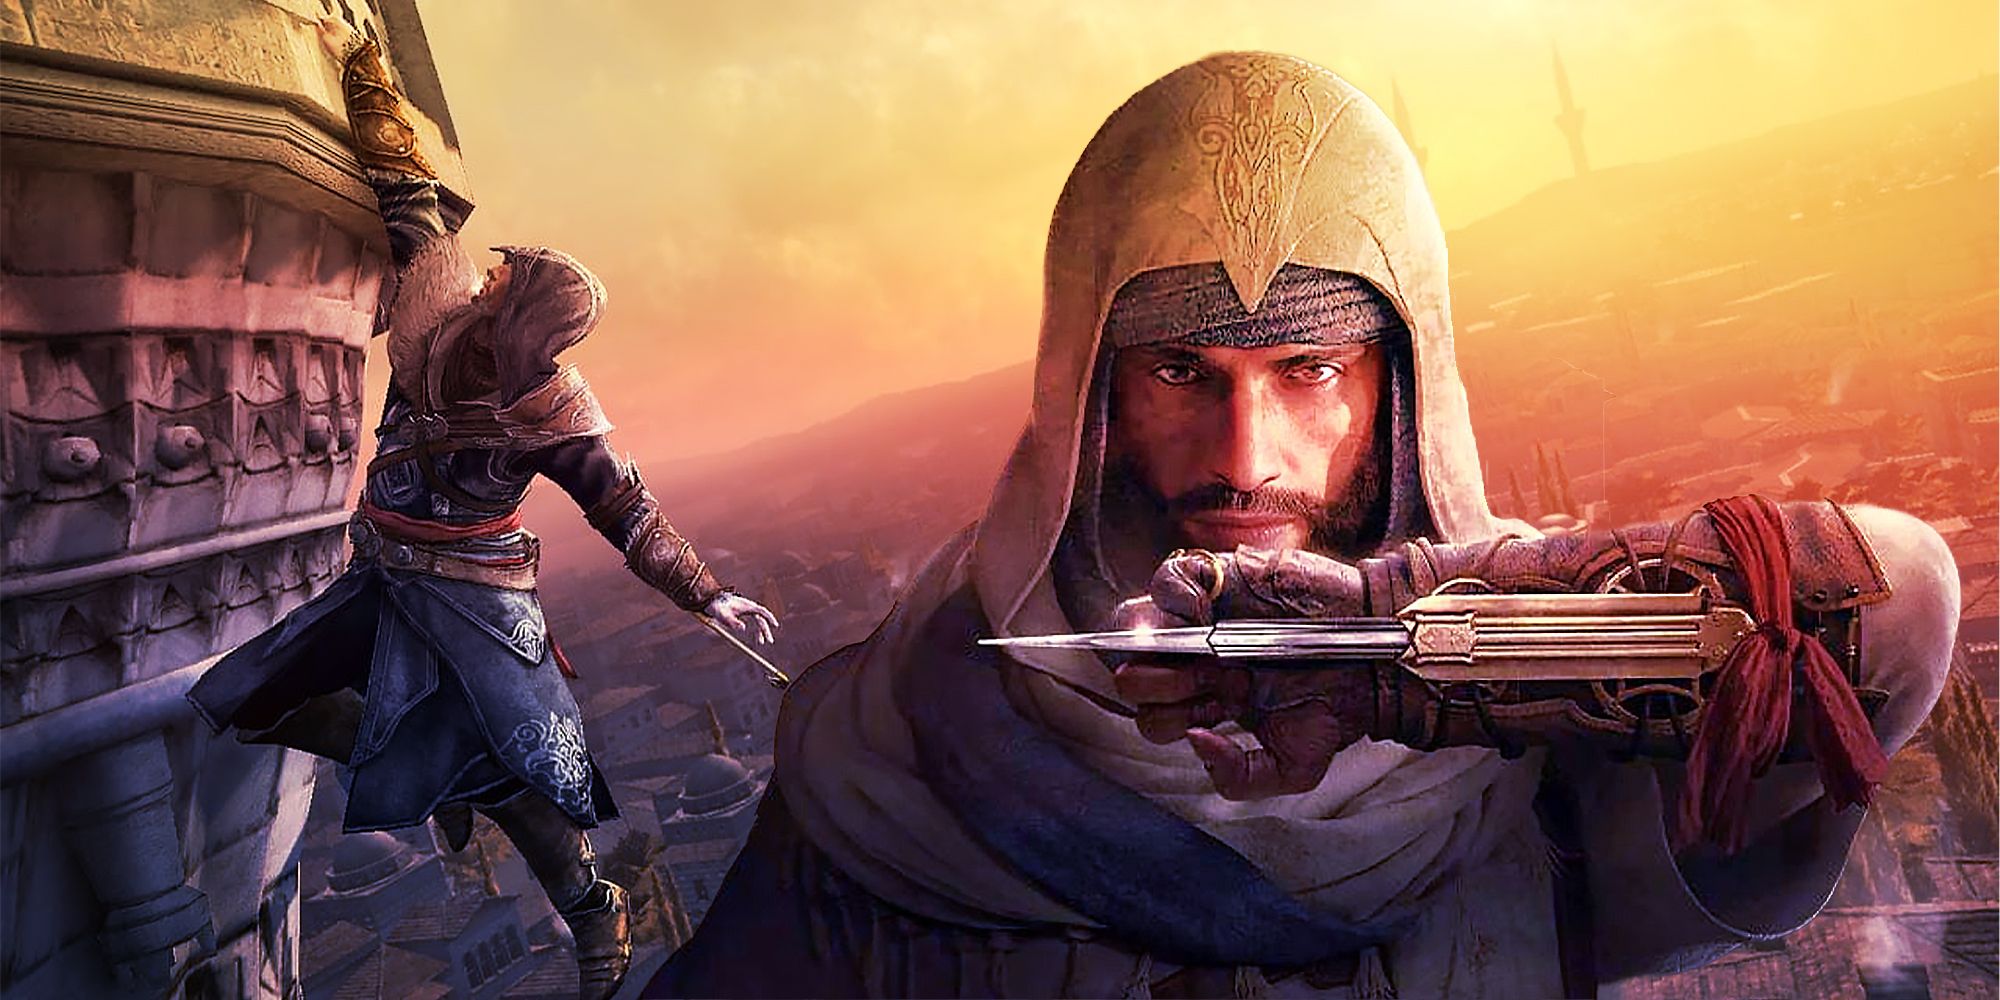 A close-up of Assassin's Creed Mirage protagonist Basim with his hidden blade extended in front of his face, superimposed on a background showing Basim hanging from the edge of a building above Baghdad.